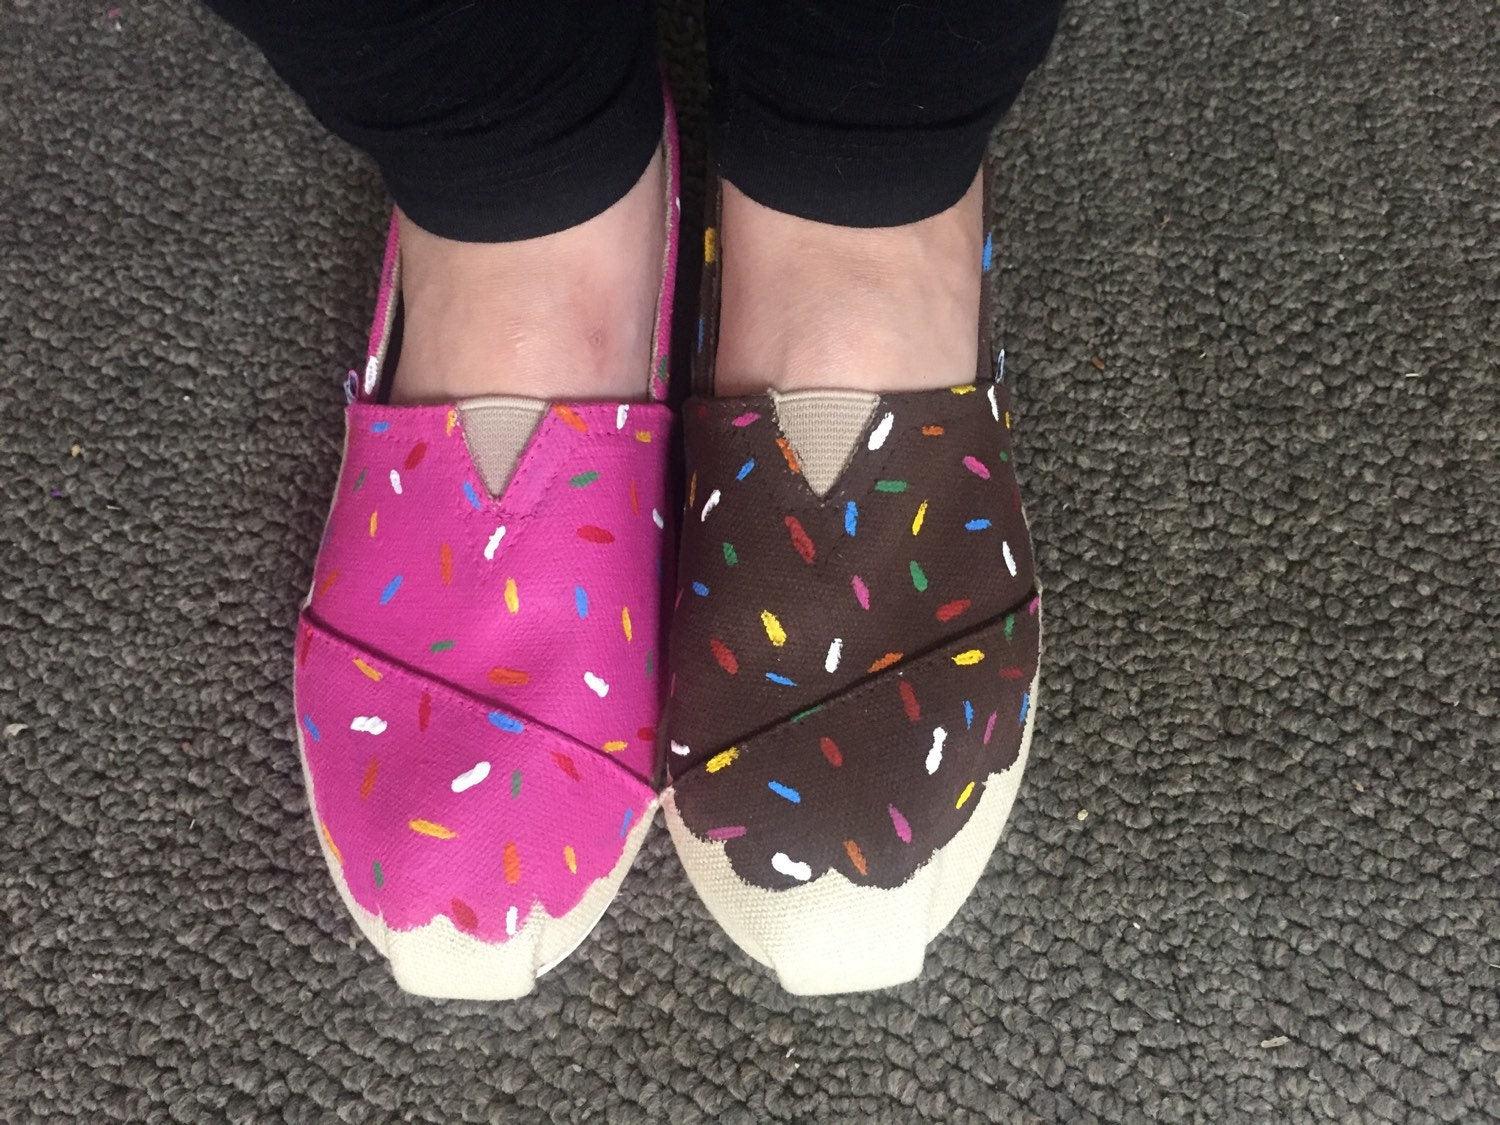 Donut with Sprinkles Shoes